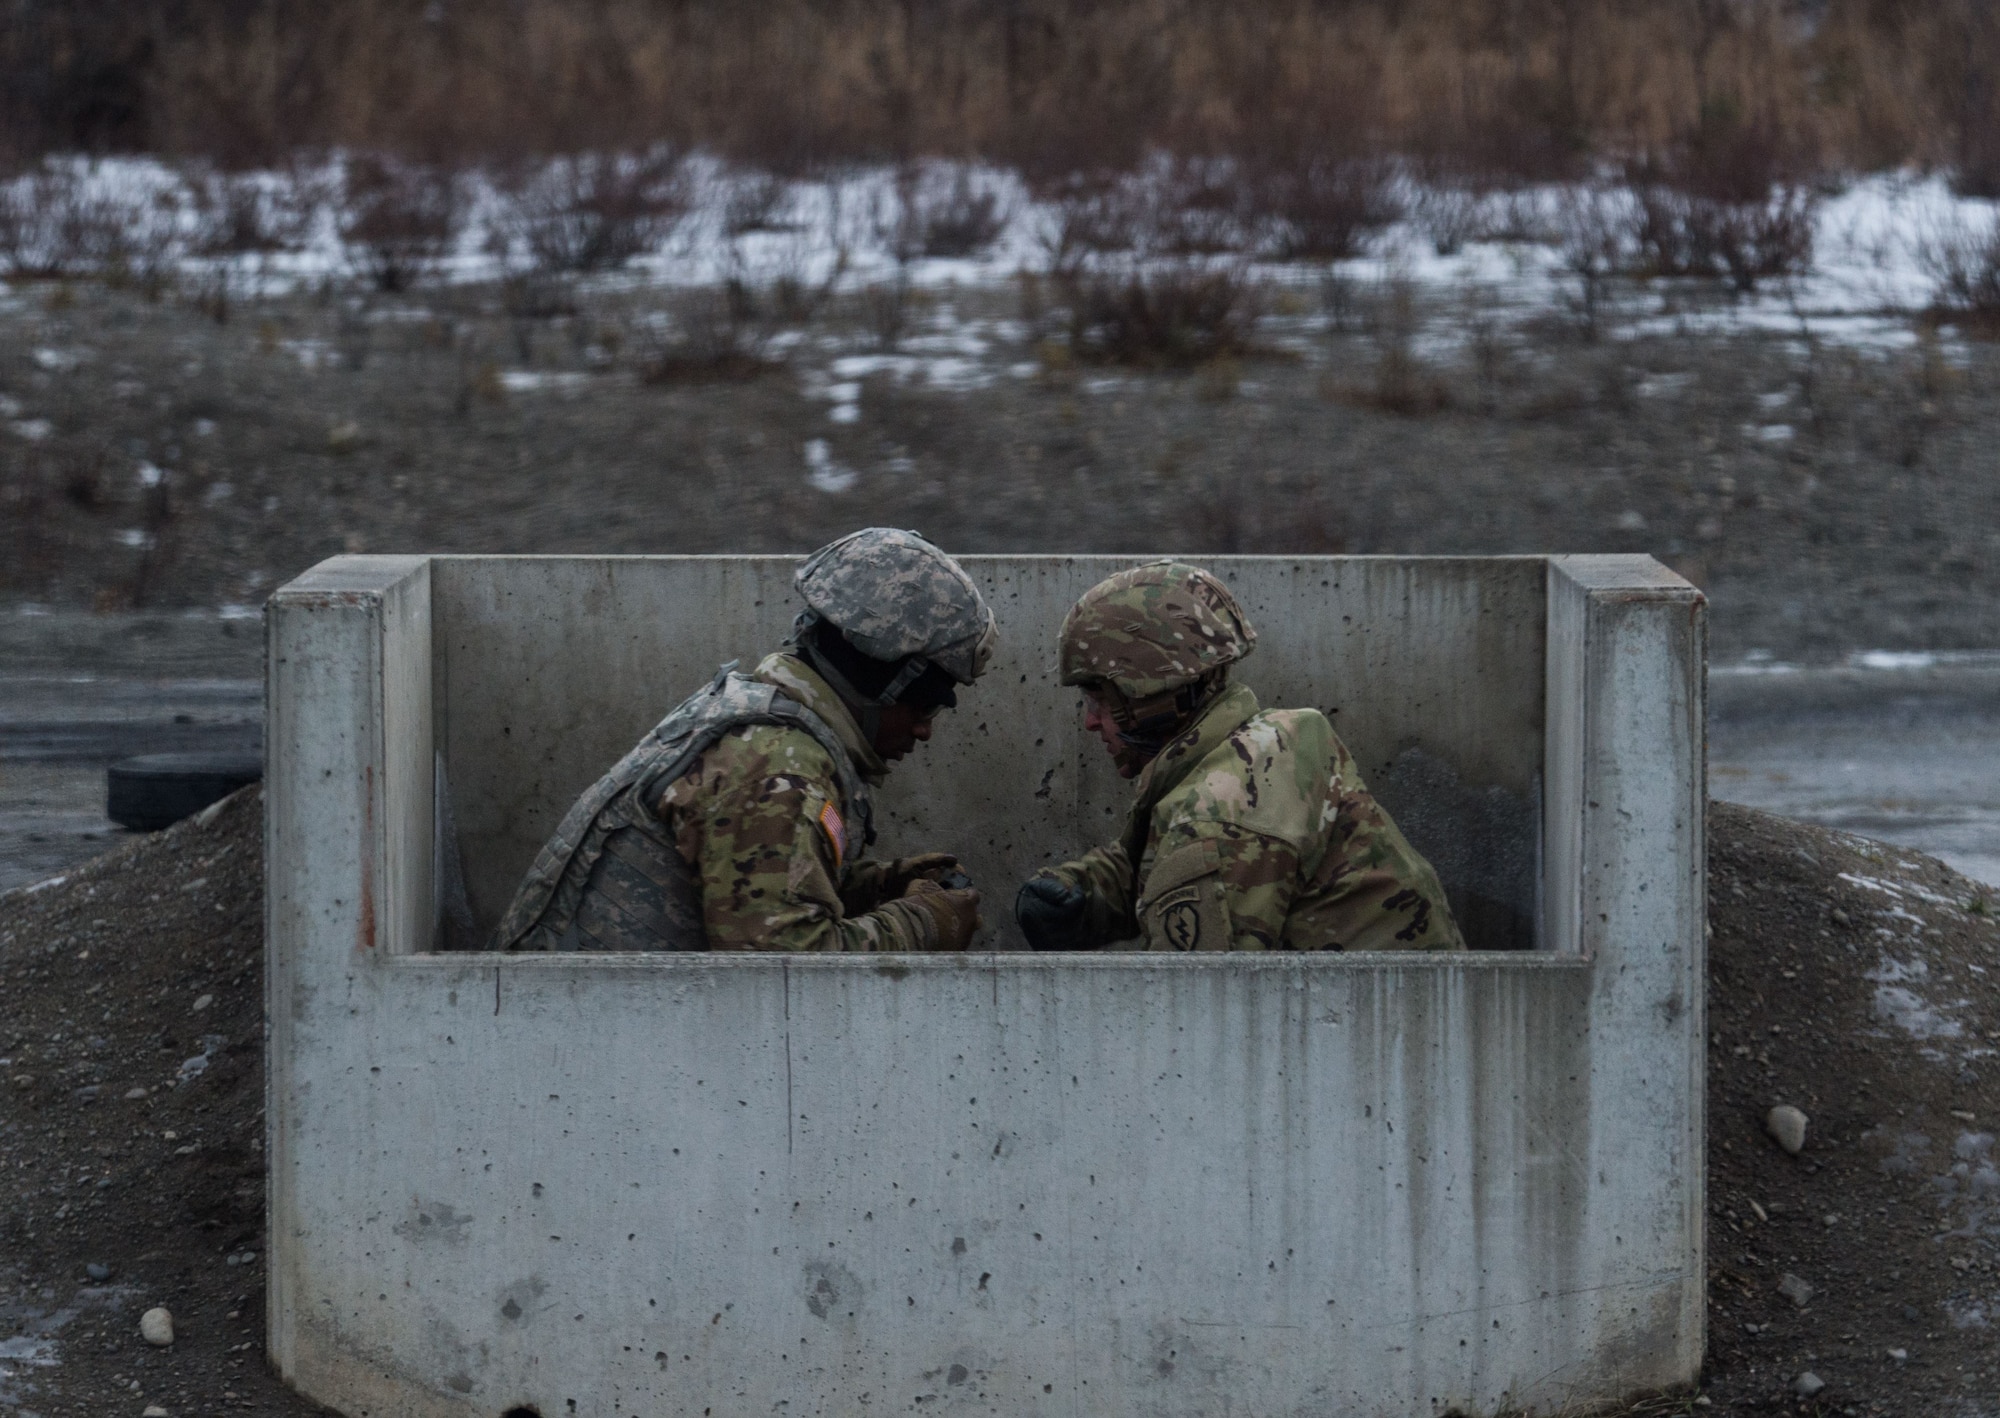 Paratroopers assigned to 3rd Battalion, 509th Parachute Infantry Regiment, 4th Infantry Brigade Combat Team (Airborne), 25th Infantry Division, U.S. Army Alaska, conduct M67 fragmentation grenade live fire training at Kraft Range on Joint Base Elmendorf-Richardson, Alaska, Dec. 12, 2017. A ‘pit’ noncommissioned officer supervised the Soldiers throwing grenades to maintain a safe instructional environment, enforce precaution standards, and direct them on proper handling of explosives. The fragmentation hand grenade has a lethal radius of five meters and can produce casualties up to 15 meters, dispersing fragments as far as 230 meters.